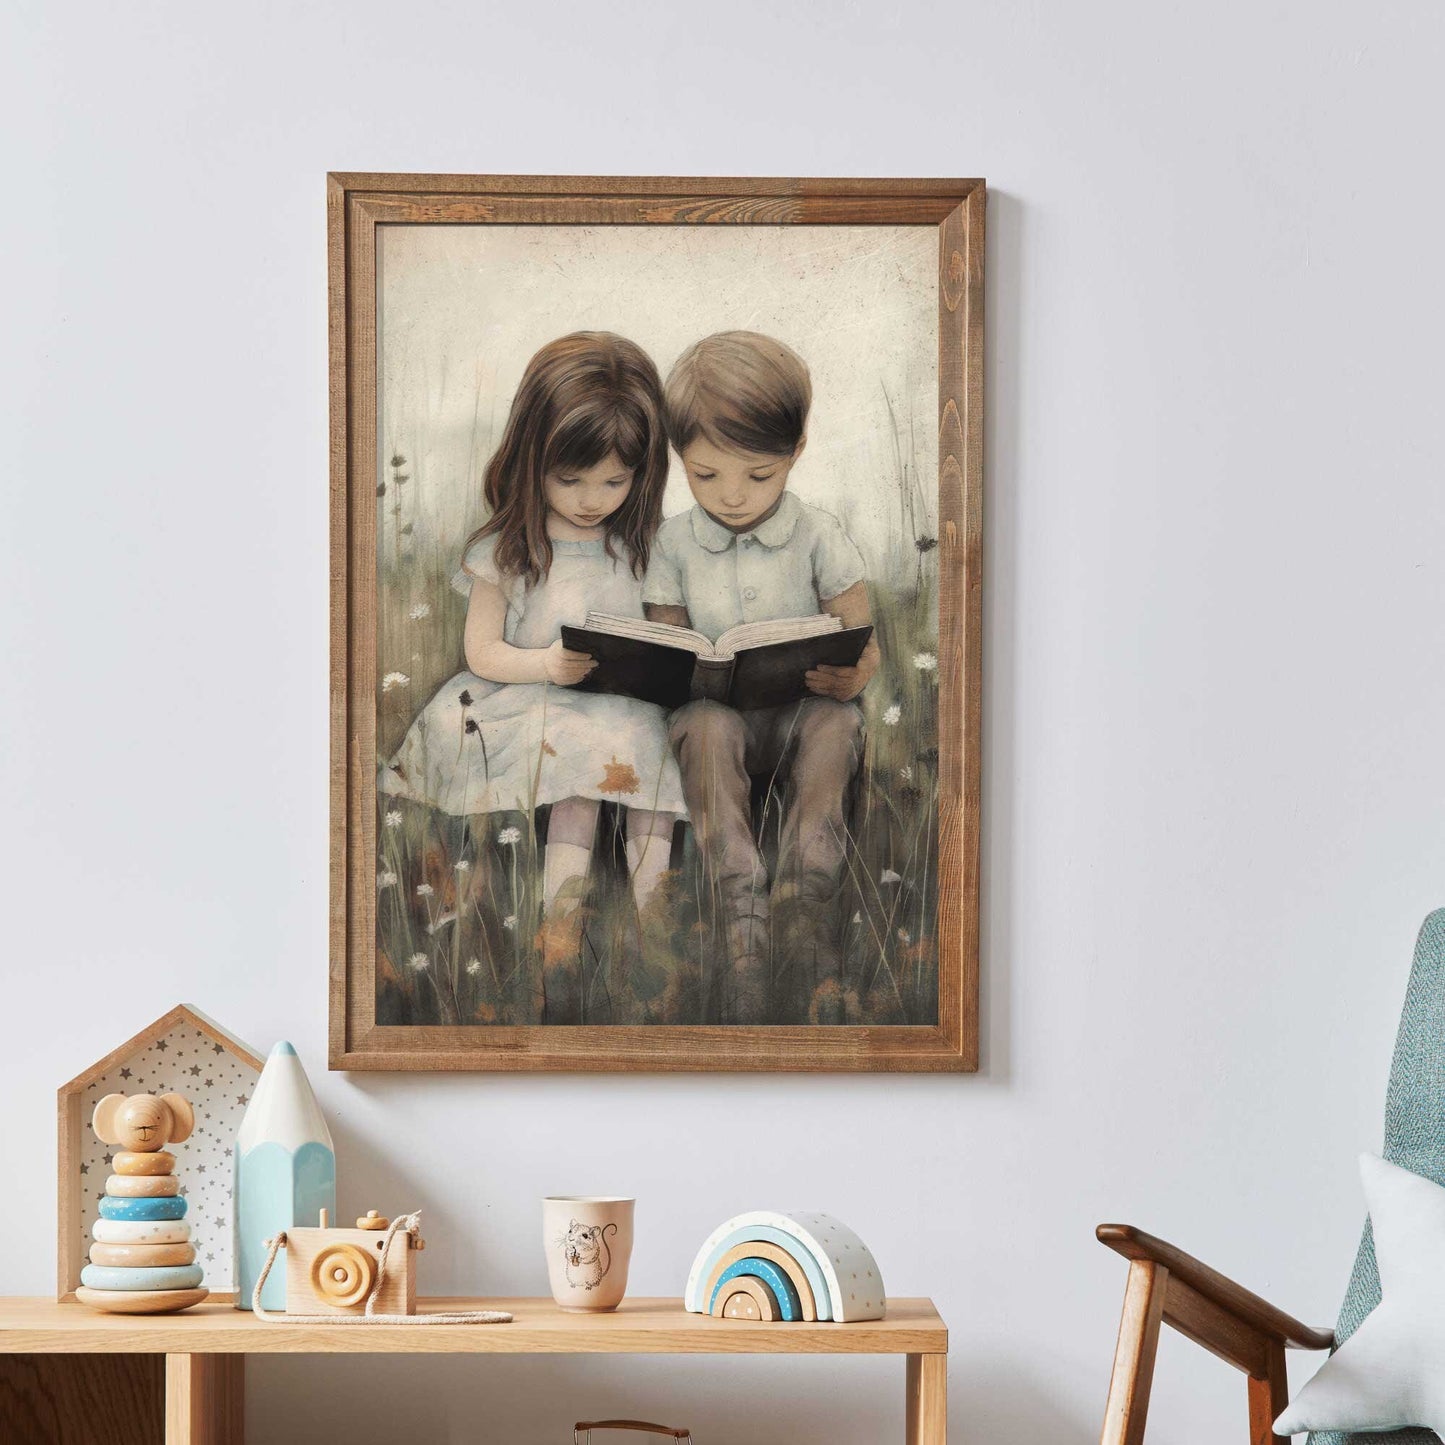 Read Decor for Kids, Sibling Print, Brother and Sister Wall Decor, Toddler Room Decor, Encourage Reading & Learning, Digital Printable Art